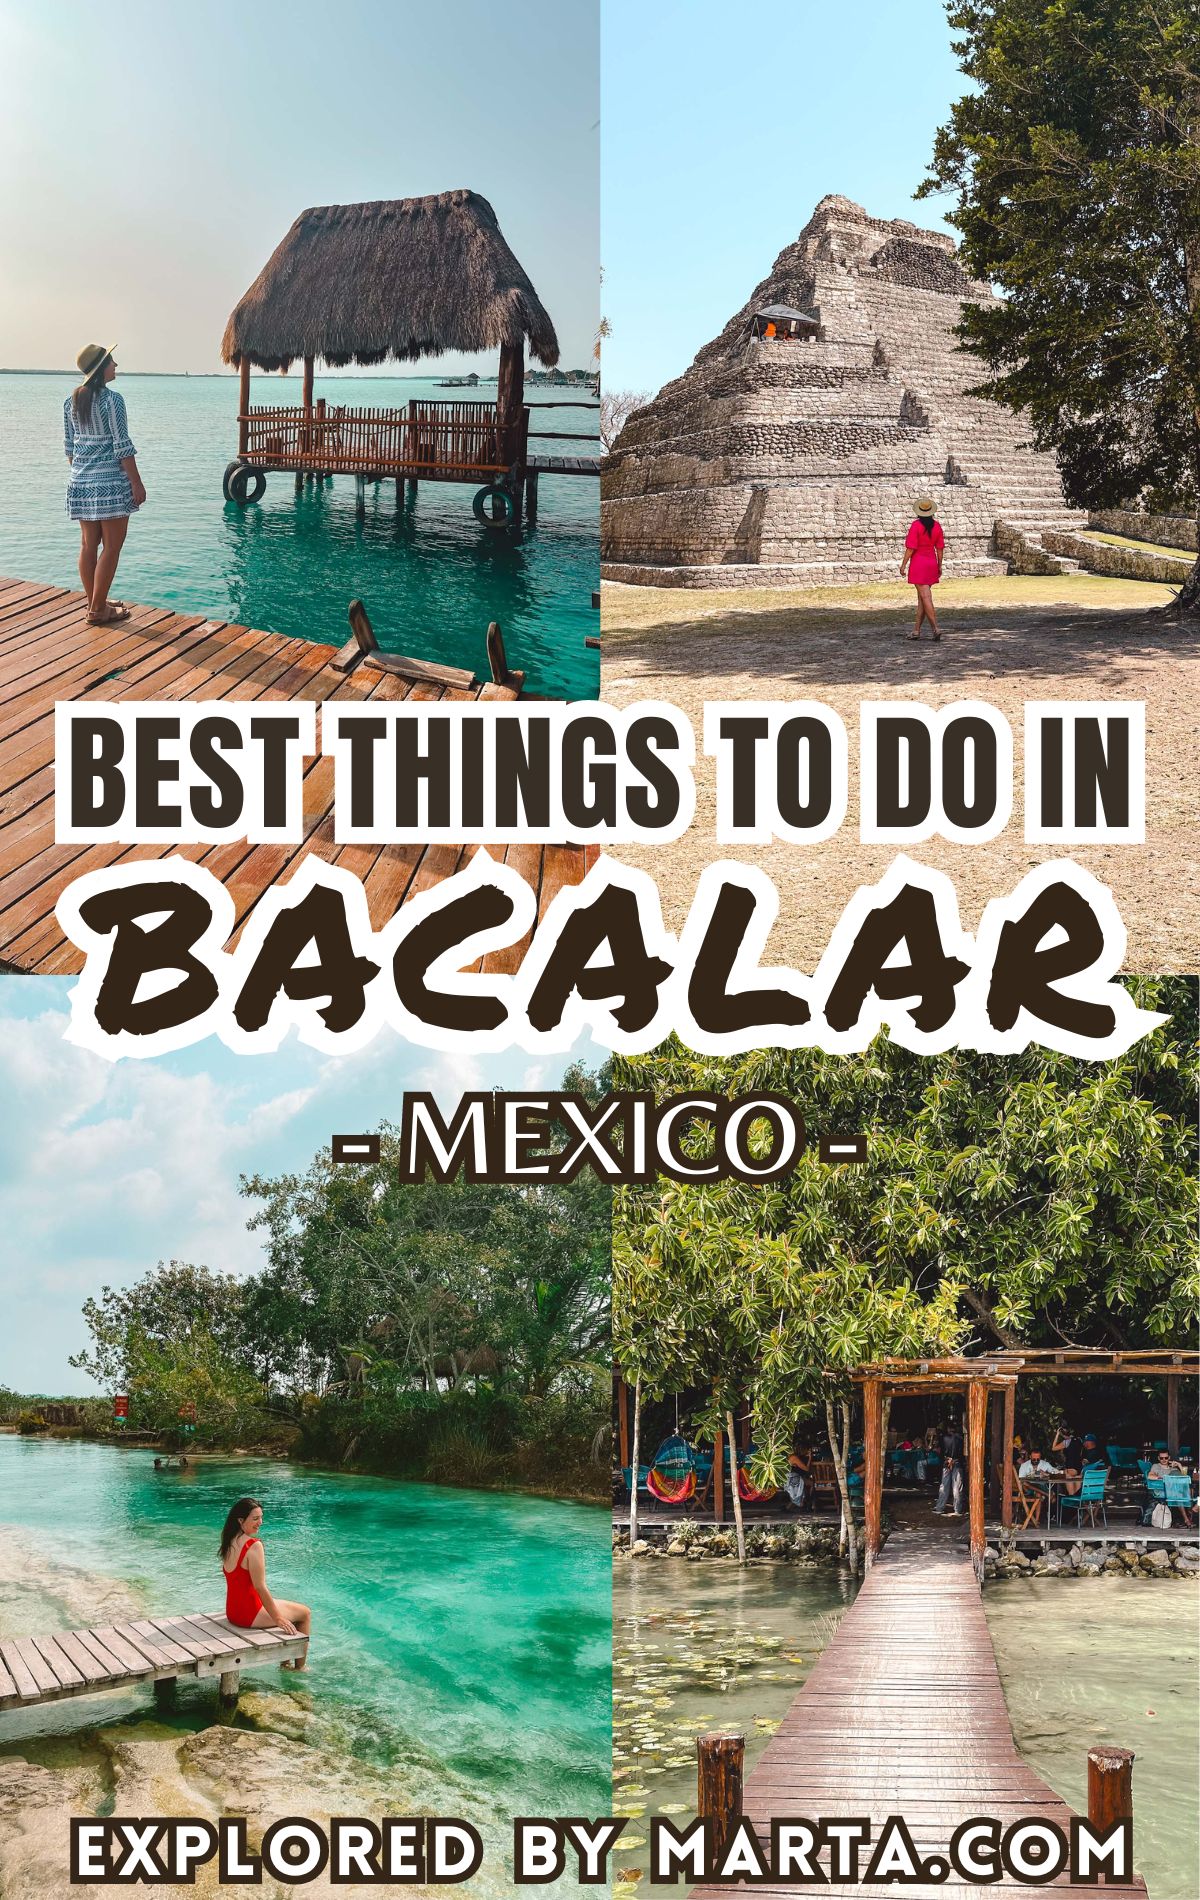 Best things to do in Bacalar, Mexico